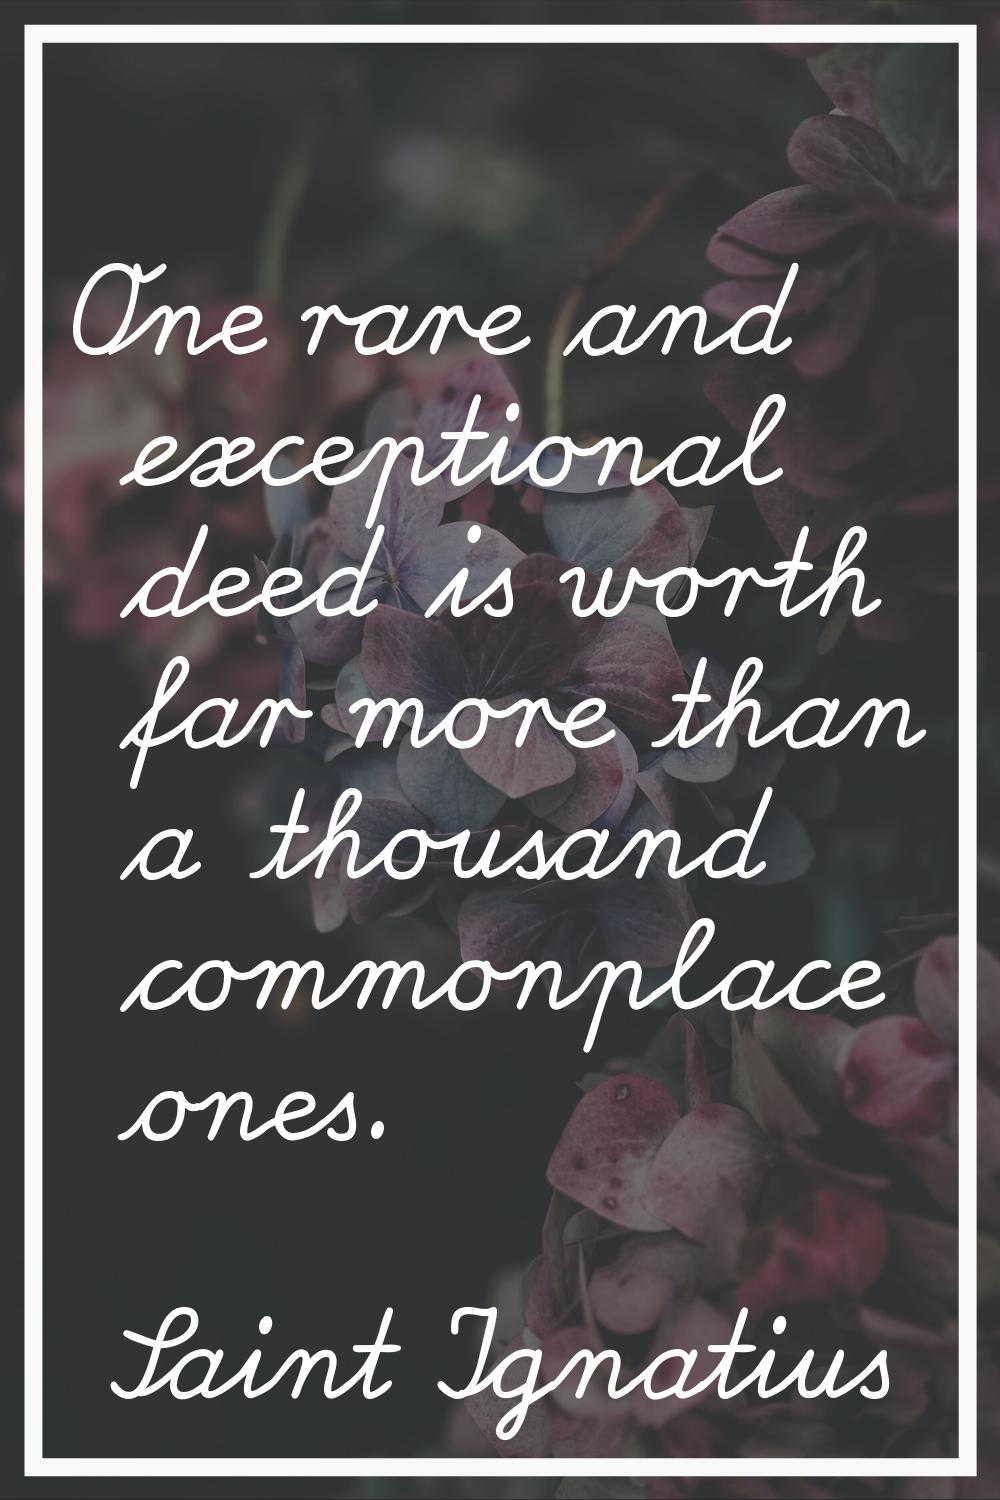 One rare and exceptional deed is worth far more than a thousand commonplace ones.